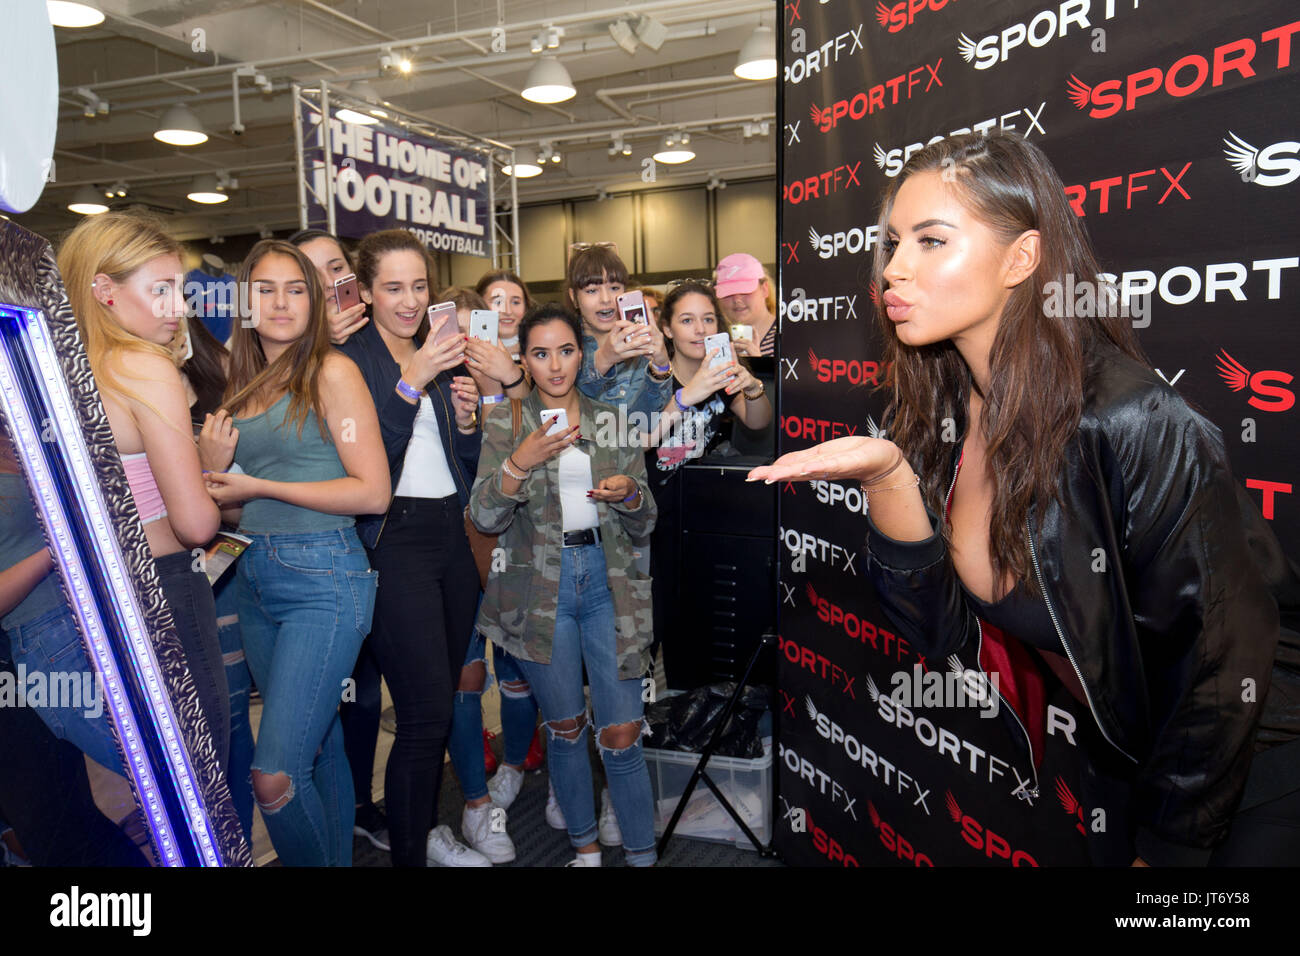 Love Island's Jessica Rose hosts a pop up to launch SportFX’s limited edition Strawberries & Cream lip balm at Sports Direct Oxford Street.   Super fit Jess modelled SportFX’s Girl Squad Athleisure wear and was mobbed by diehard fans of the ITV2 show.  Featuring: Jessica Rose Where: London, ,, United Kingdom When: 08 Jul 2017 Credit: PinPep/WENN.com Stock Photo